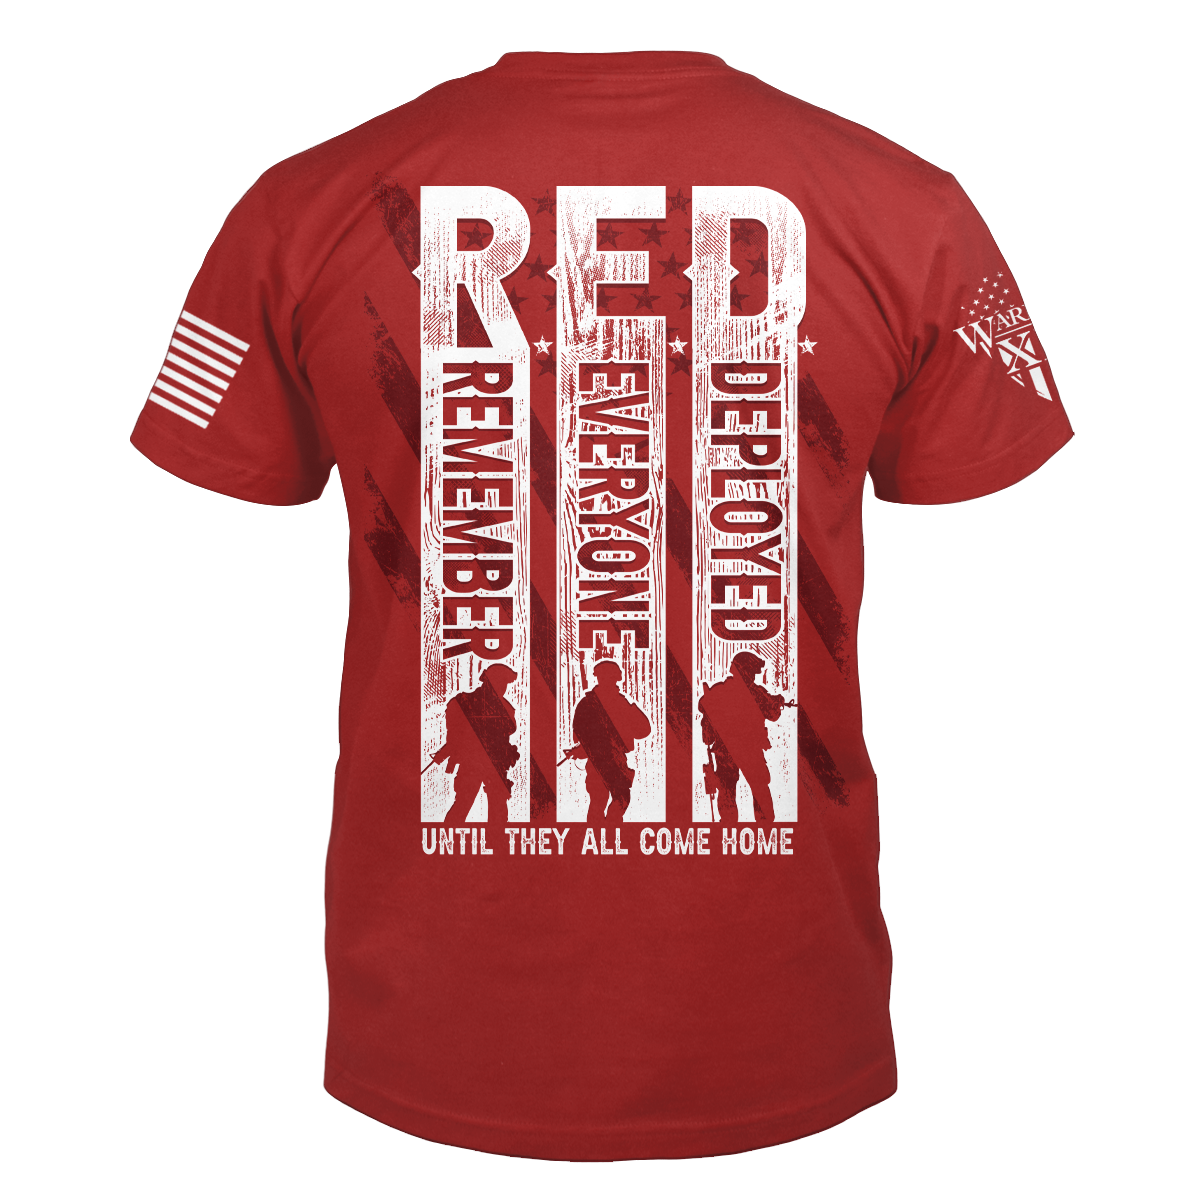 The back of a red t-shirt which has an image with silhouettes of solders with the words "Remember Everyone Deployed, until they call come home."